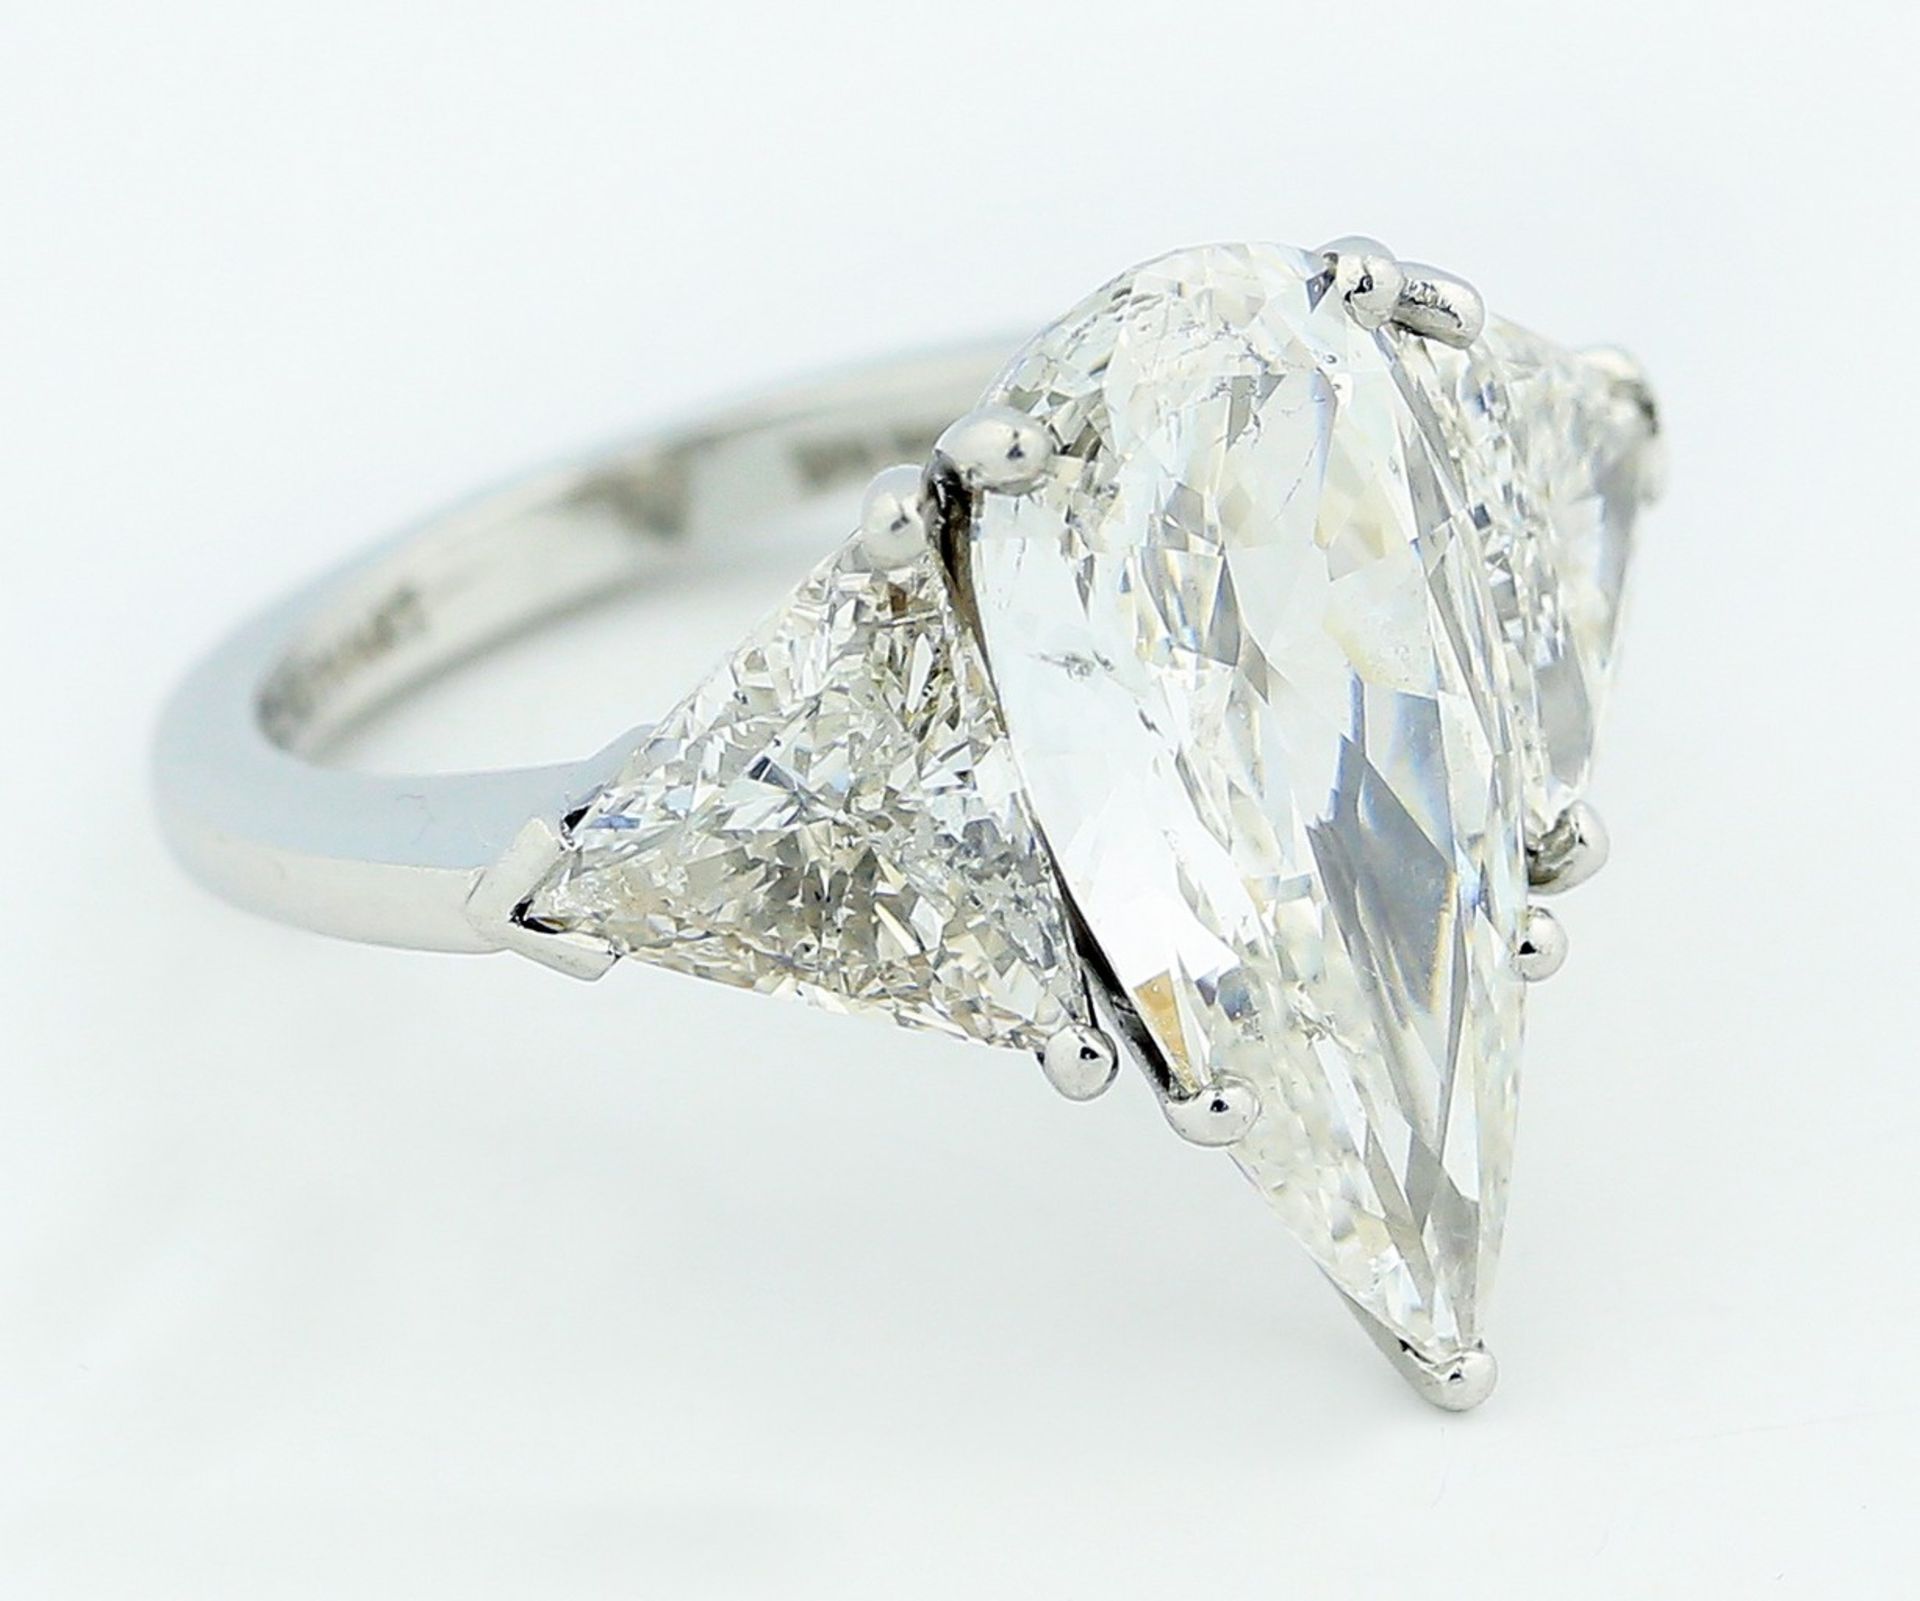 4.01 CARAT DIAMOND PLATINUM RING Centered by a pear-shaped diamond weighing 4.01 carats, flanked - Image 2 of 4